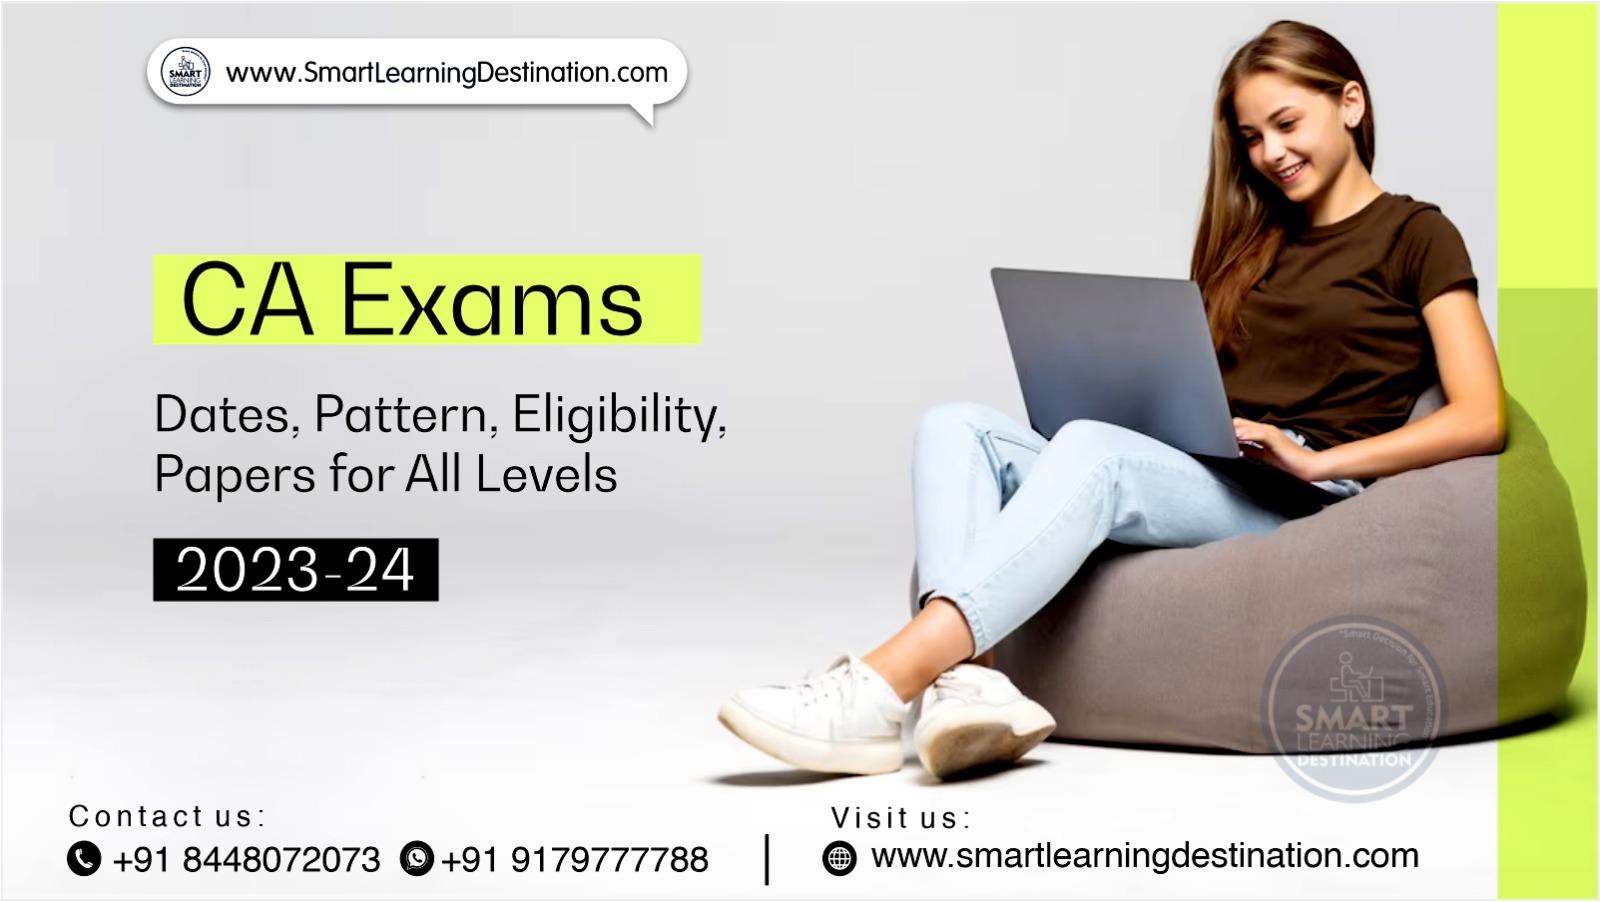 CA Exams Dates Pattern, Eligibility Papers for All Levels